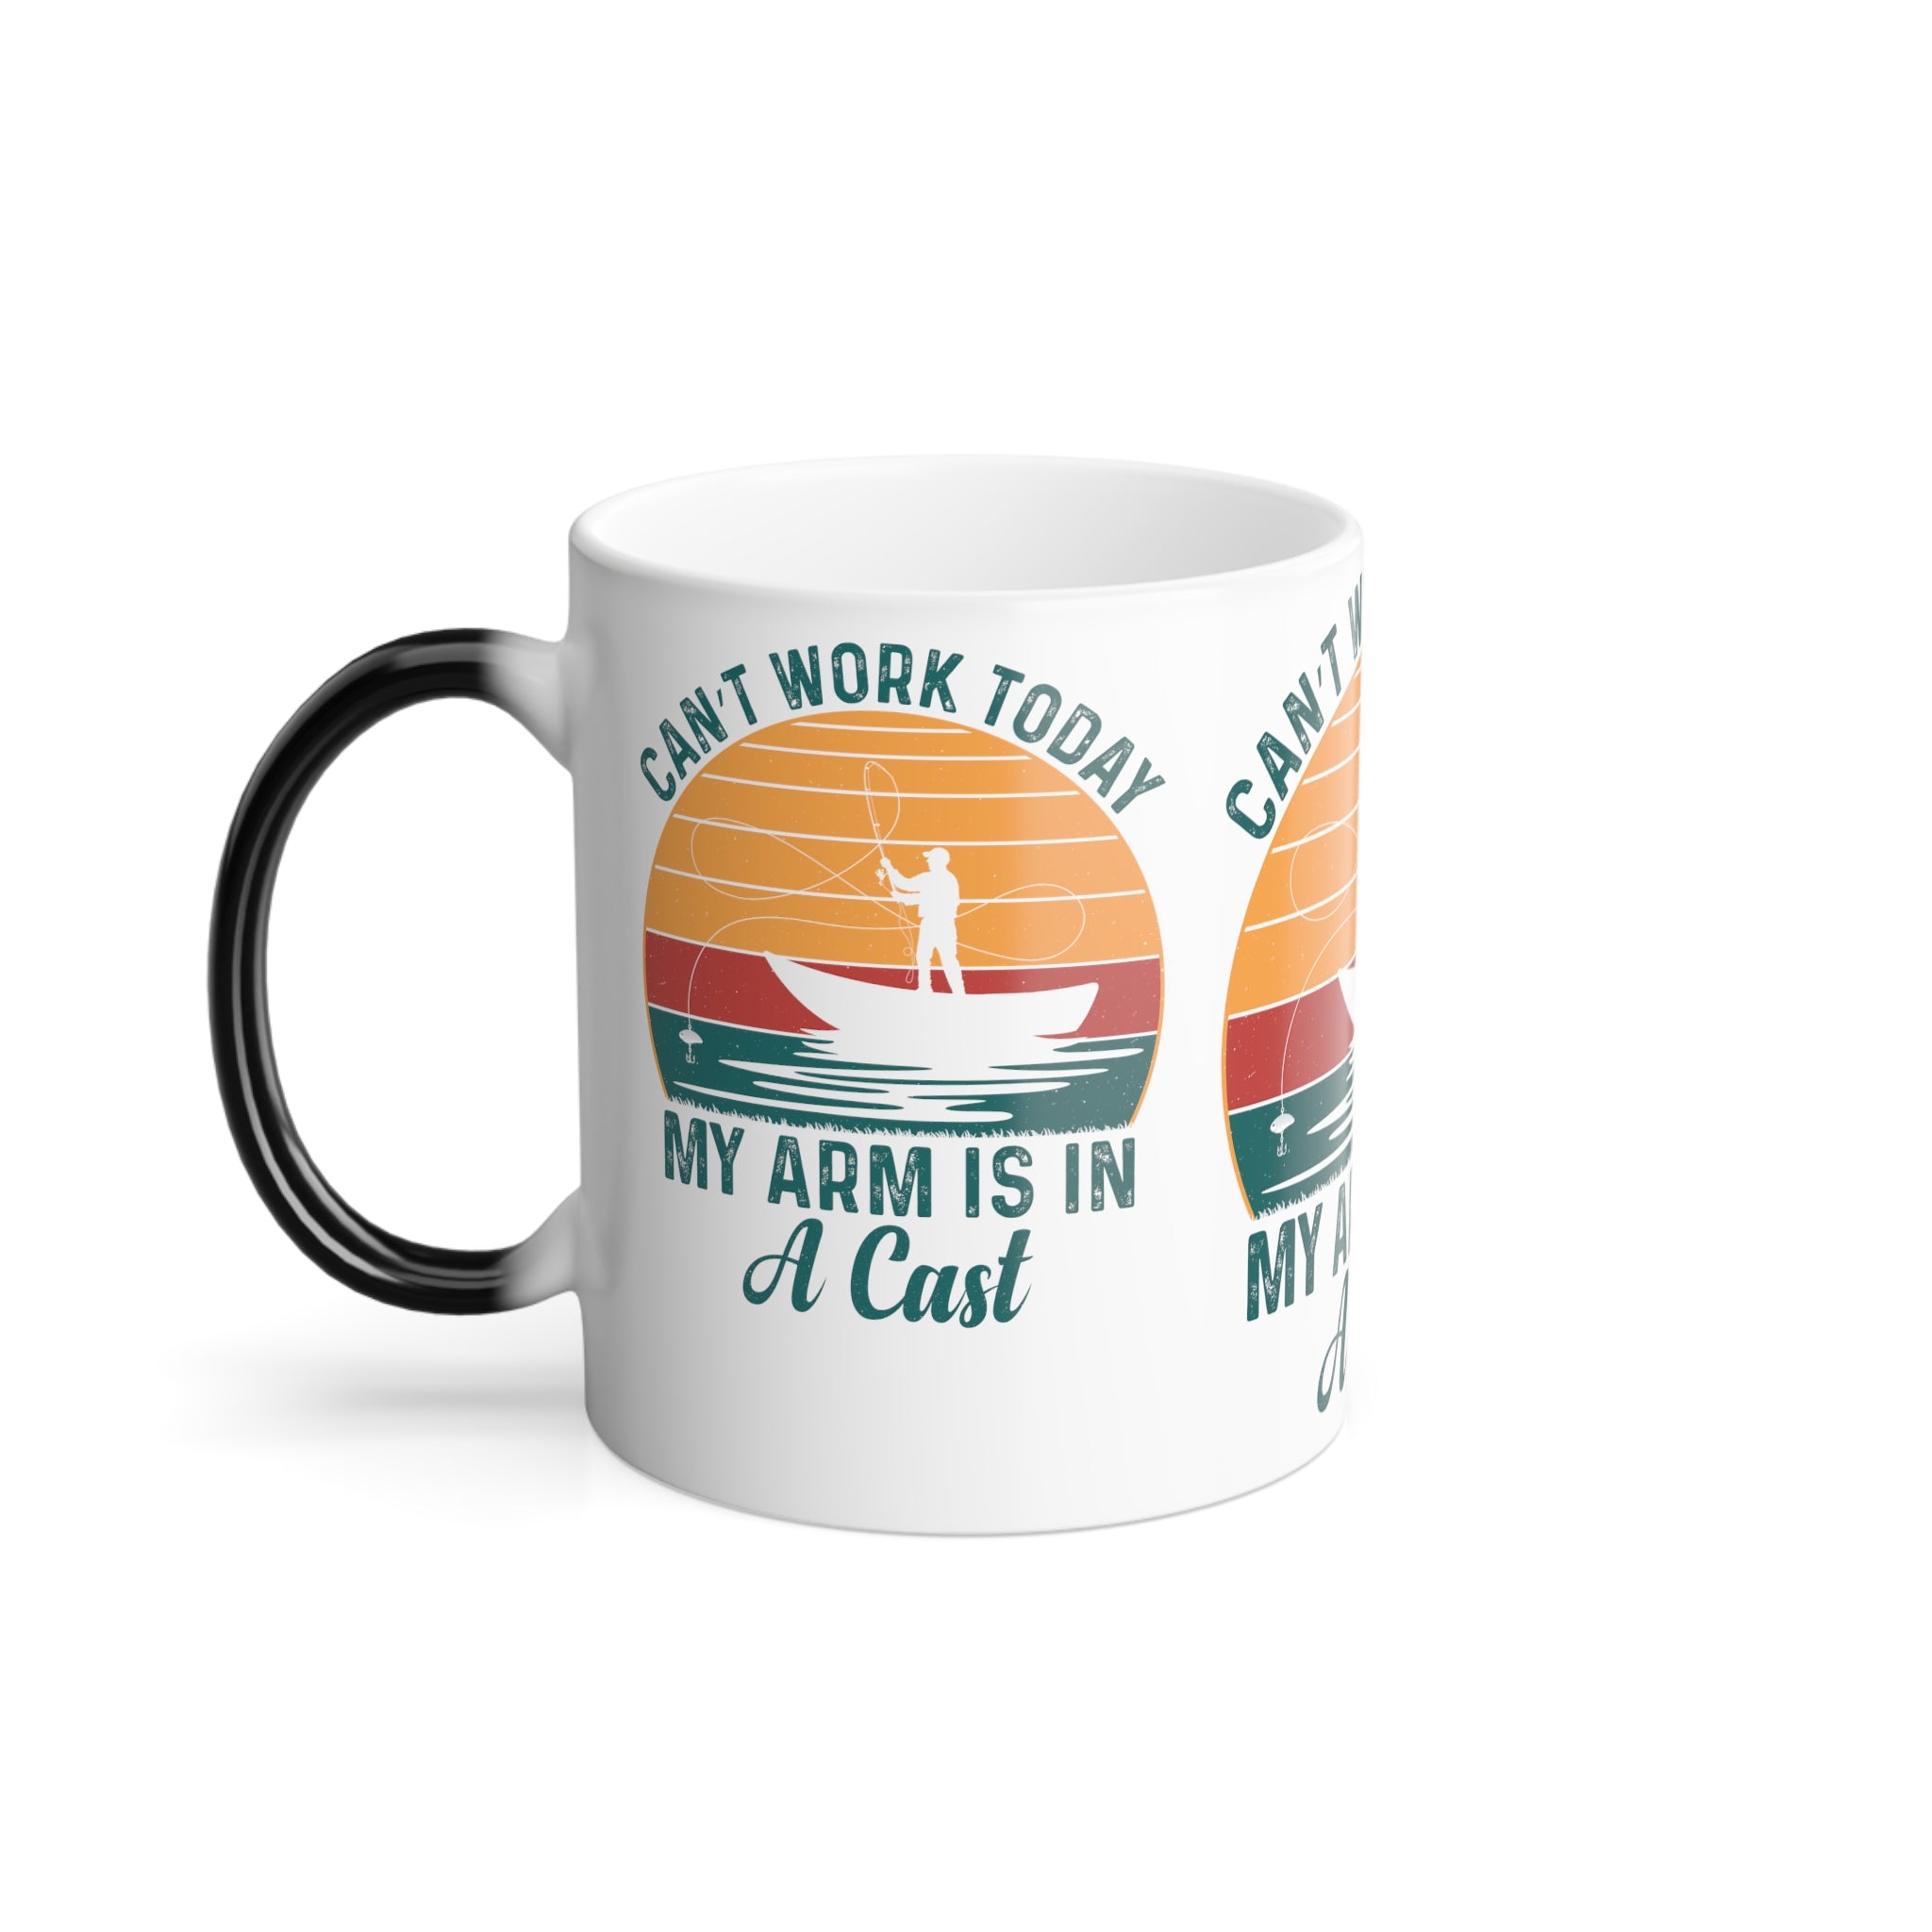 Can't Work Today My Arm is in a Cast Color Morphing Mug - 11oz | Fun and Unique Heat-Changing Coffee Cup